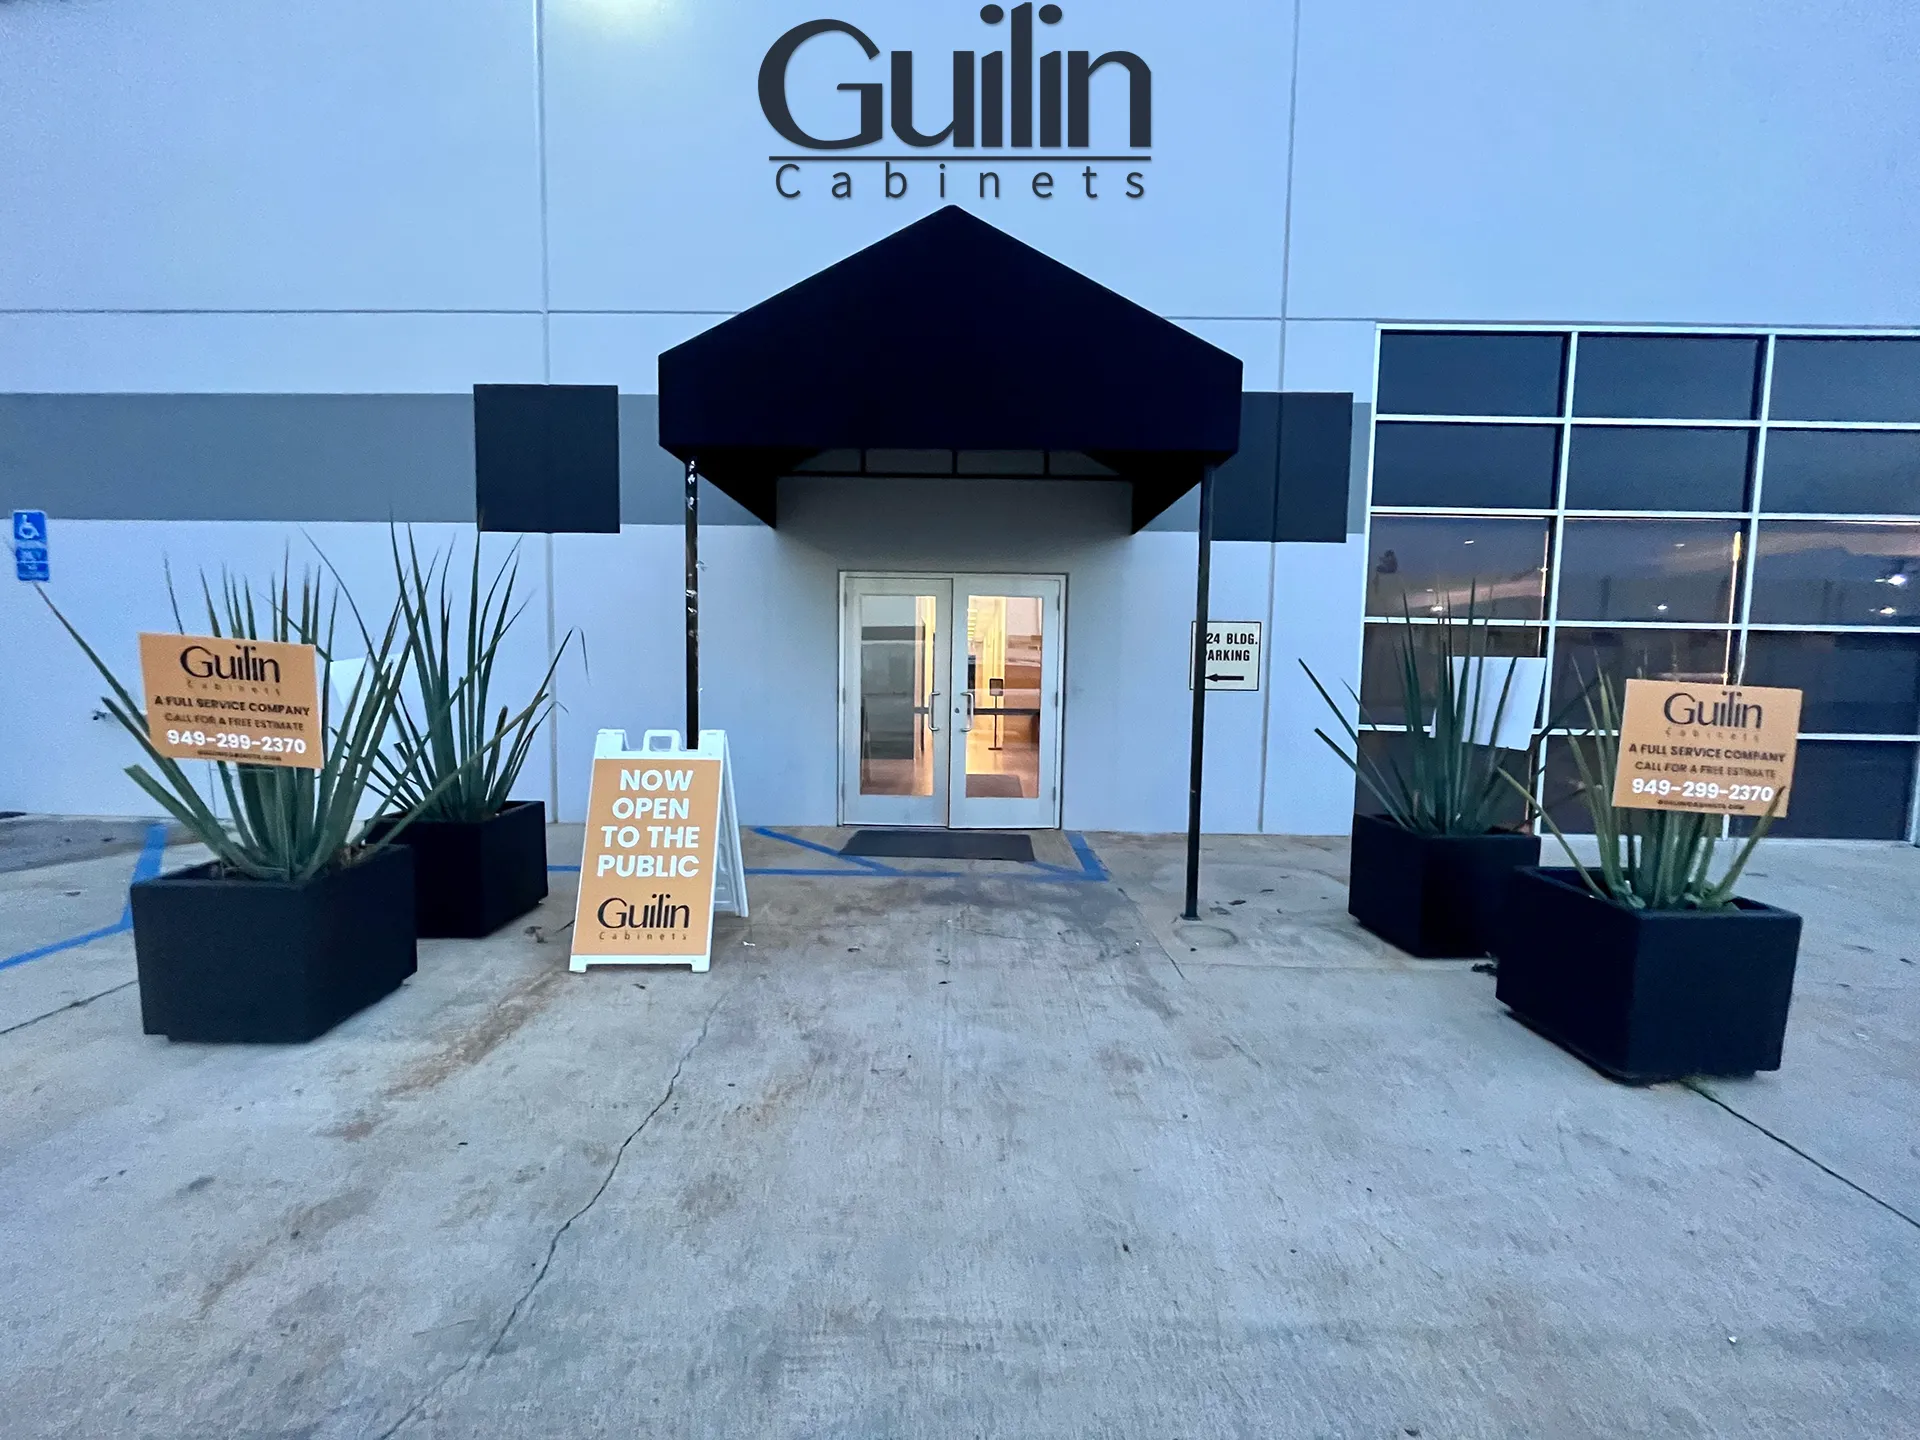 Guilin Cabinets are a one-stop shop for kitchen & bathroom remodeling needs, ranging from design consultation to procurement and installation of materials